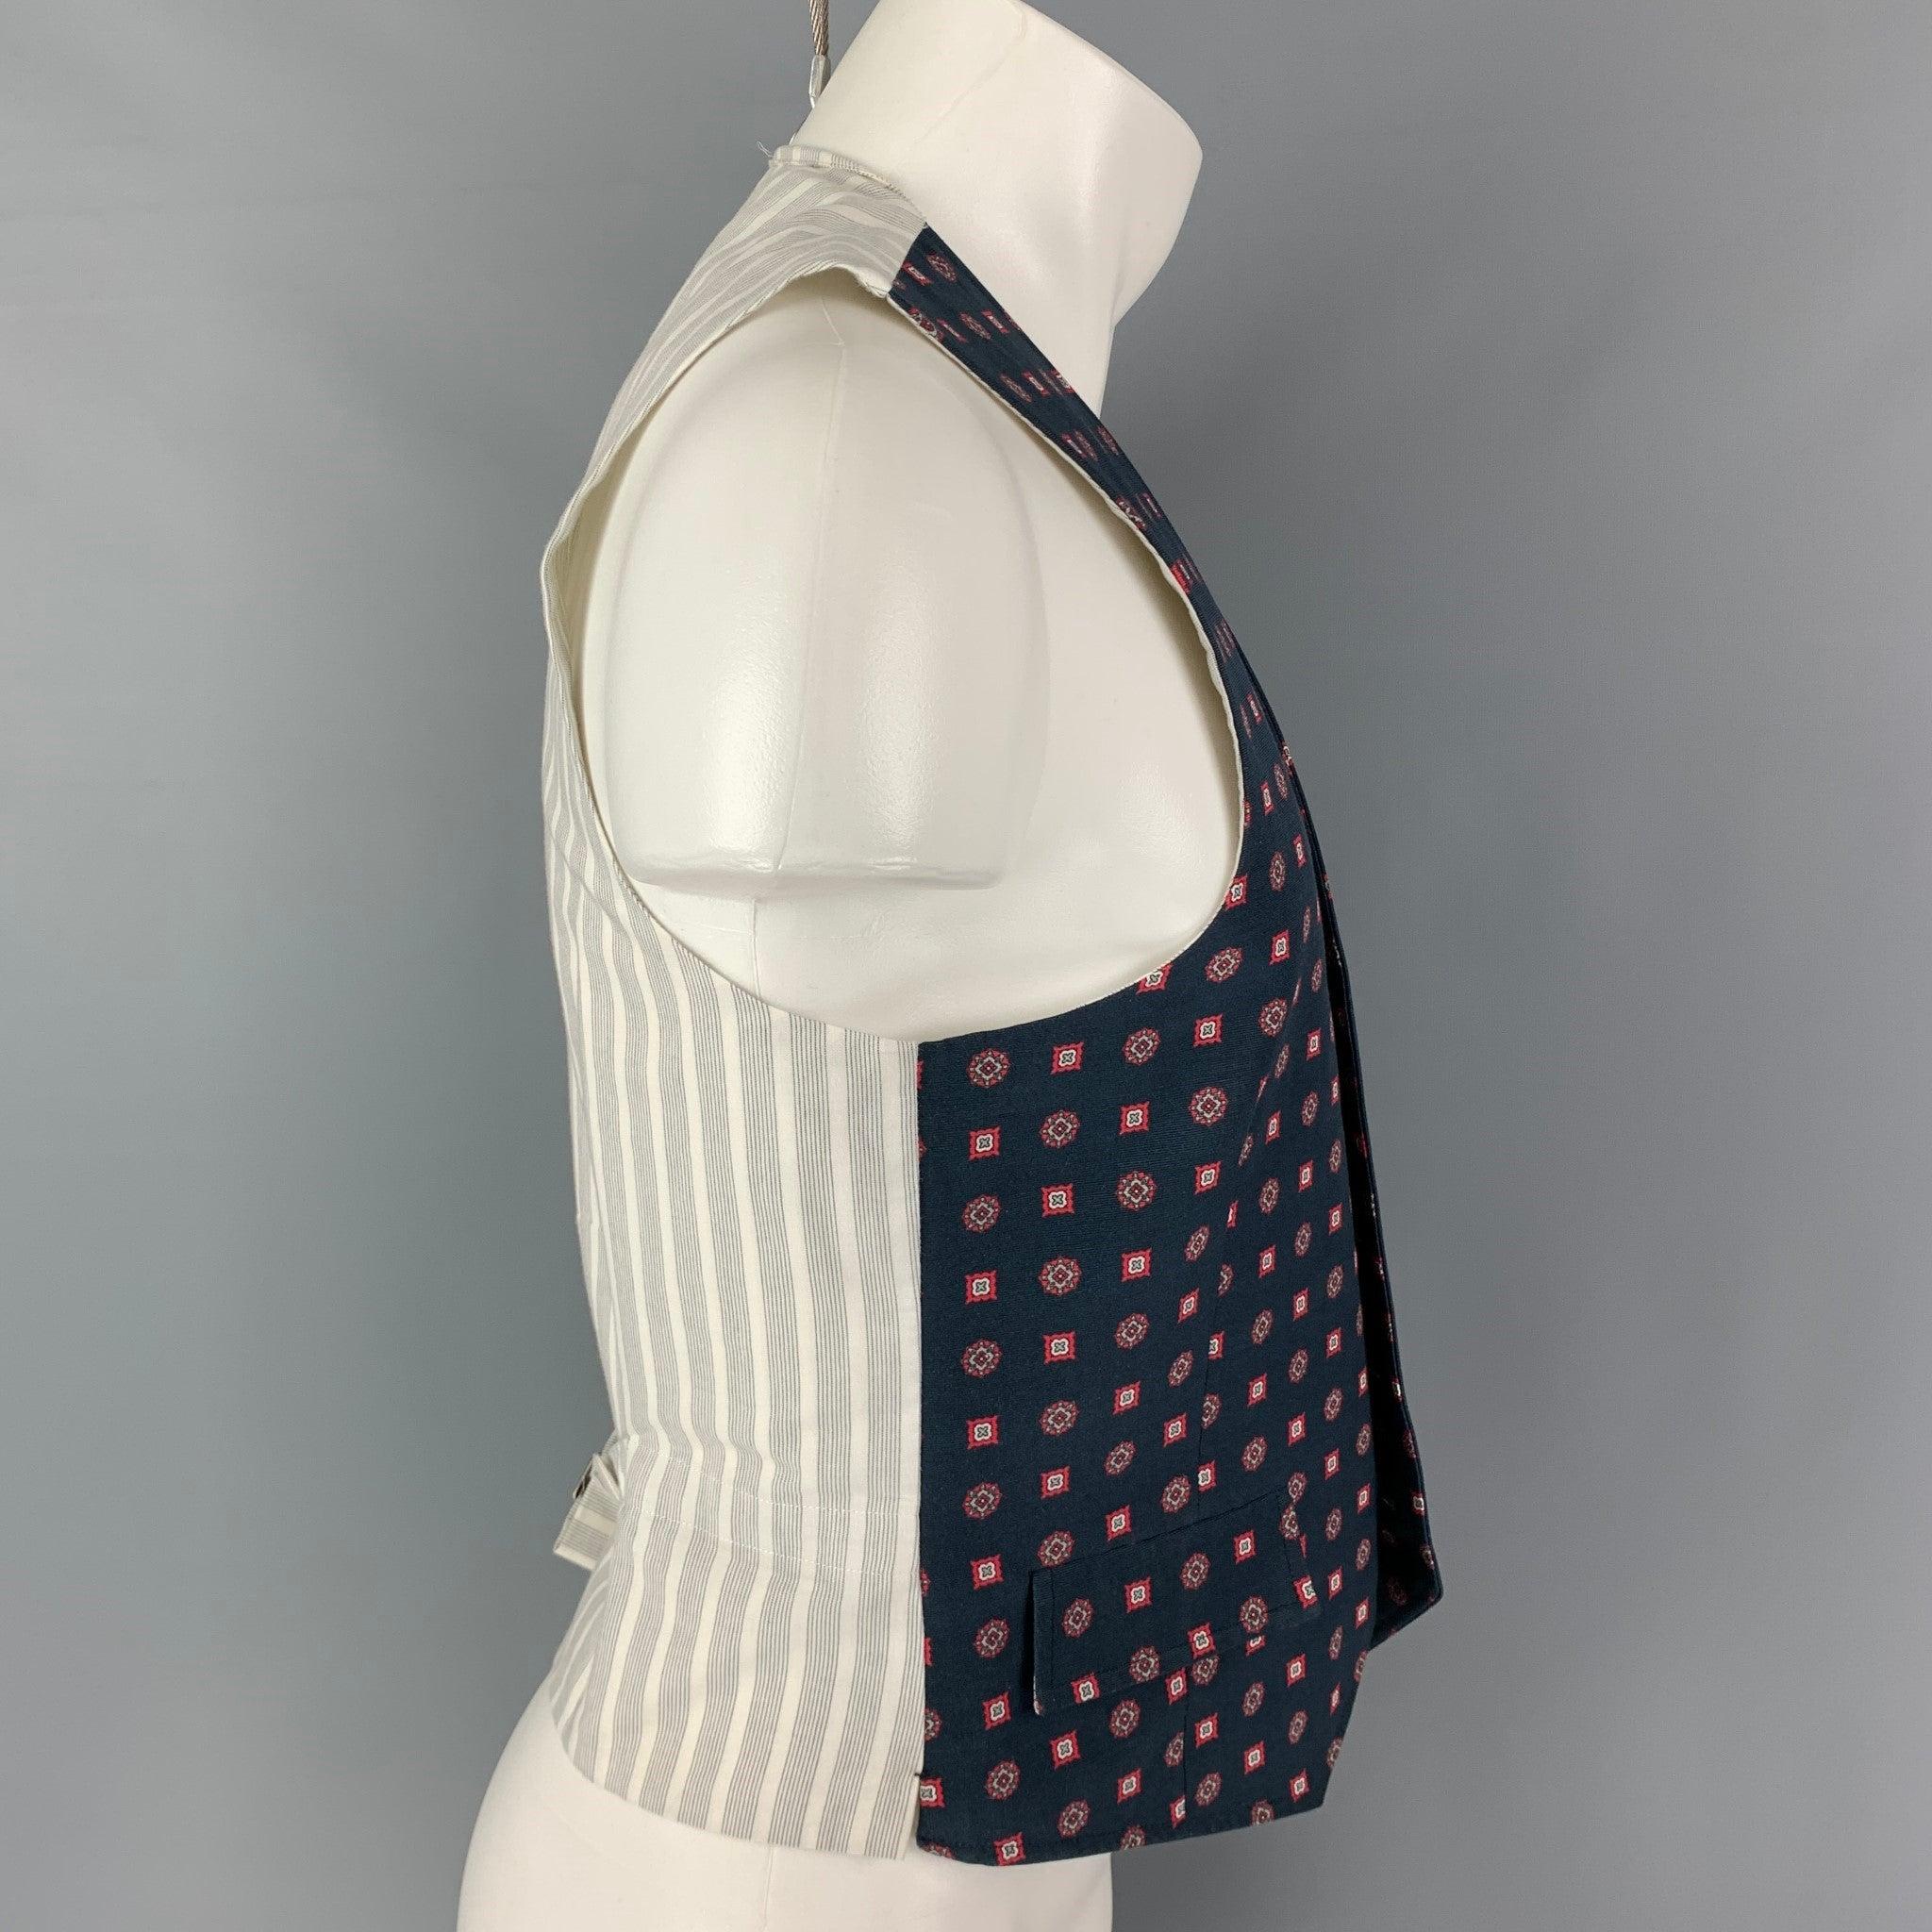 BLACK FLEECE vest comes in a navy & red cotton / viscose featuring a adjustable back belt, flap pockets, and a buttoned closure.
Excellent
Pre-Owned Condition.  

Marked:   BB0 

Measurements: 
 
Shoulder: 14 inches Chest: 36 inches Length: 21.5